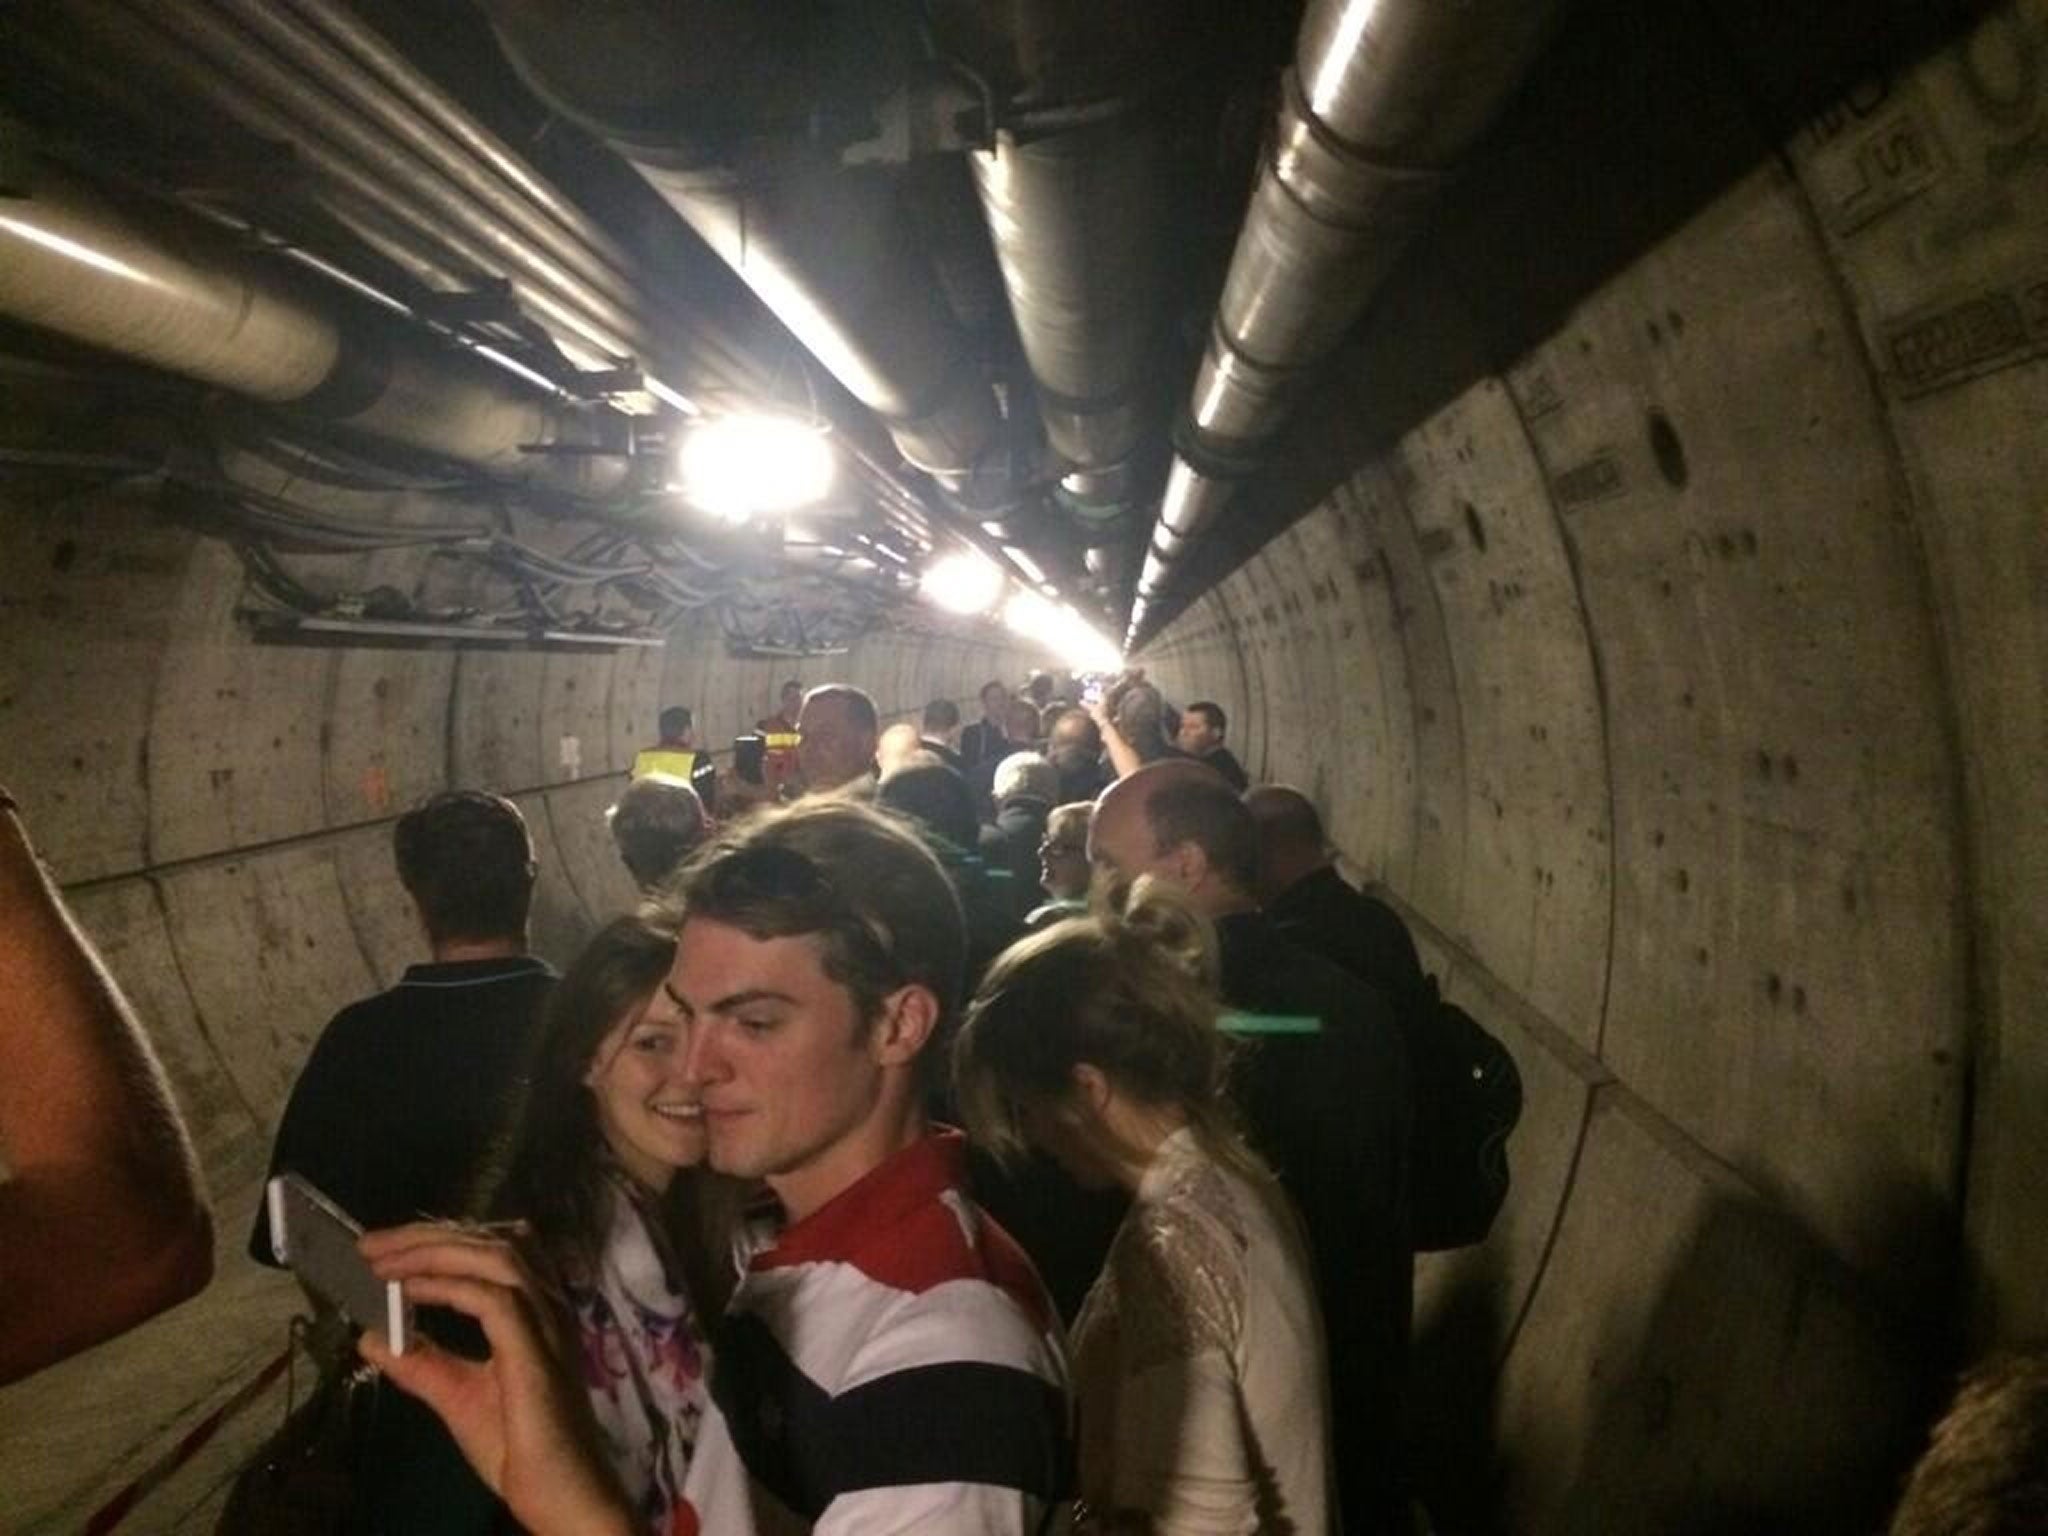 Richard Byrom tweeted this image with the caption: "Evacuation from the Eurotunnel this morning after the power lines came down"